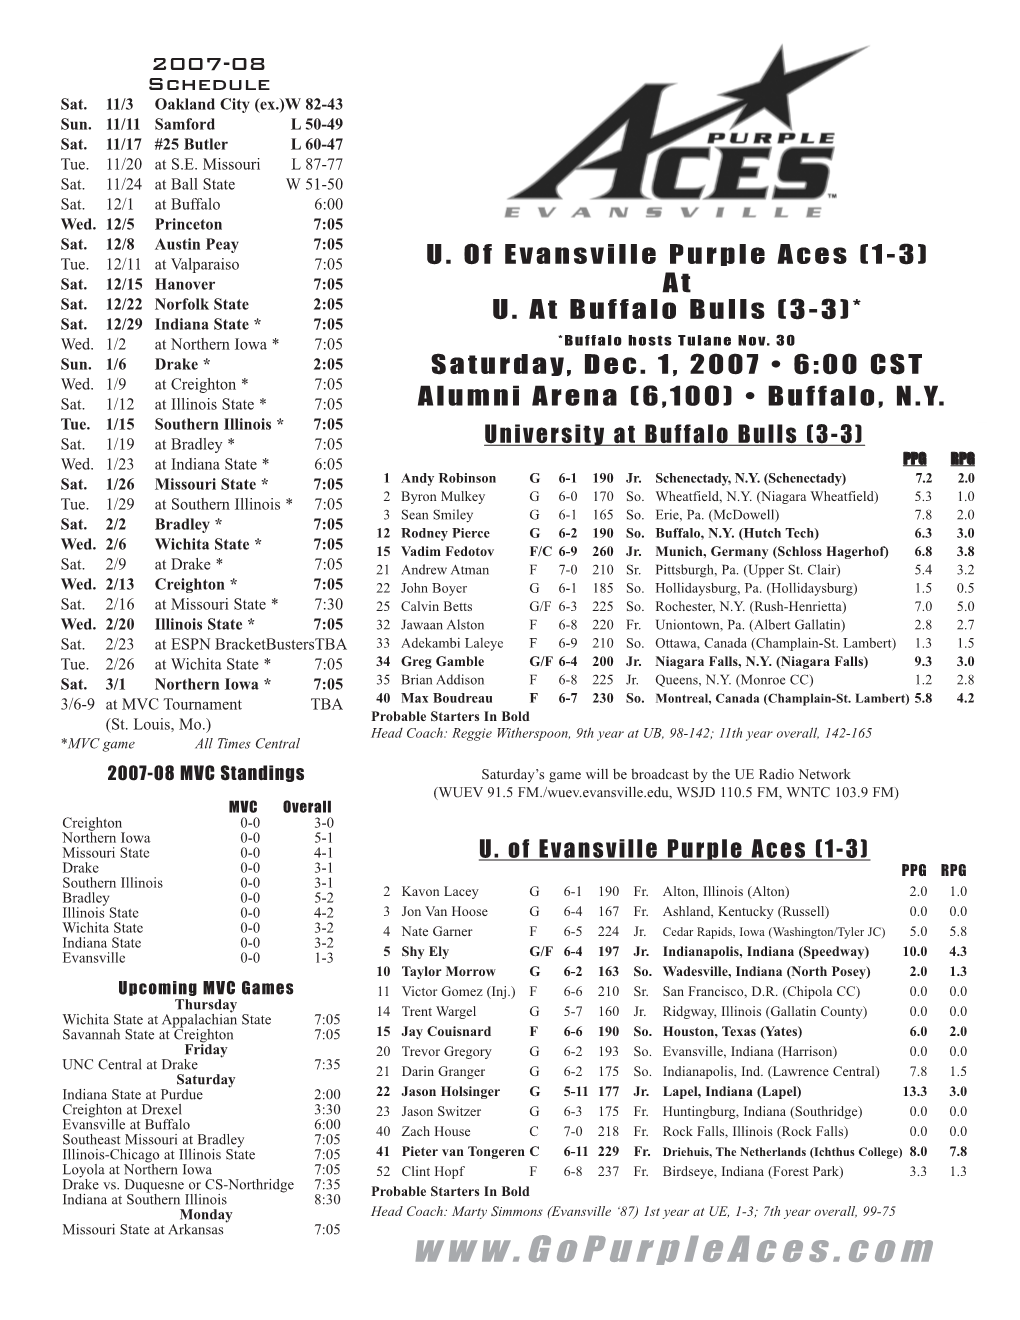 Game Notes 2-11-07